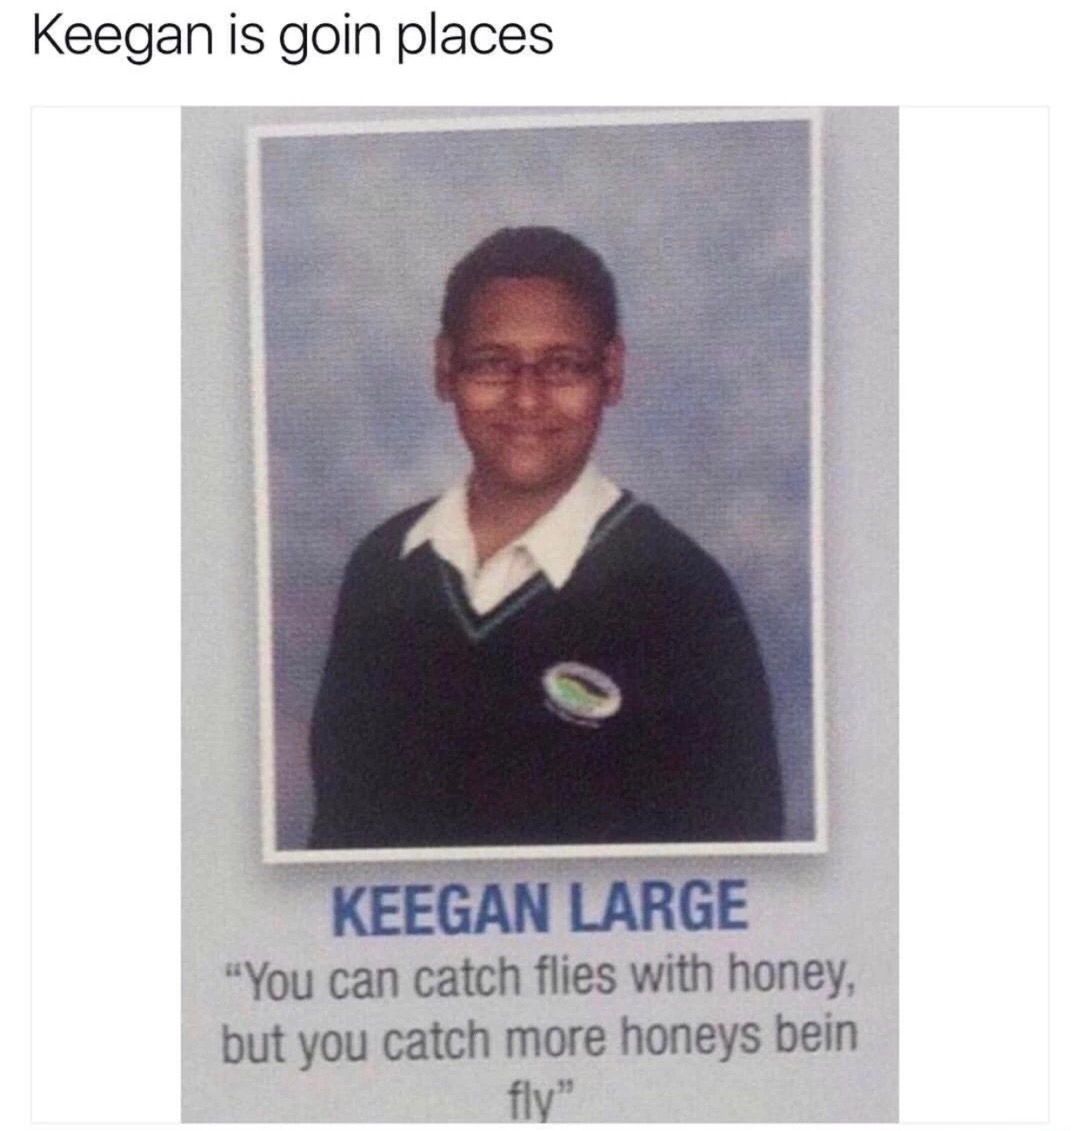 meme stream - you can t catch flies with honey - Keegan is goin places Keegan Large "You can catch flies with honey, but you catch more honeys bein fly"